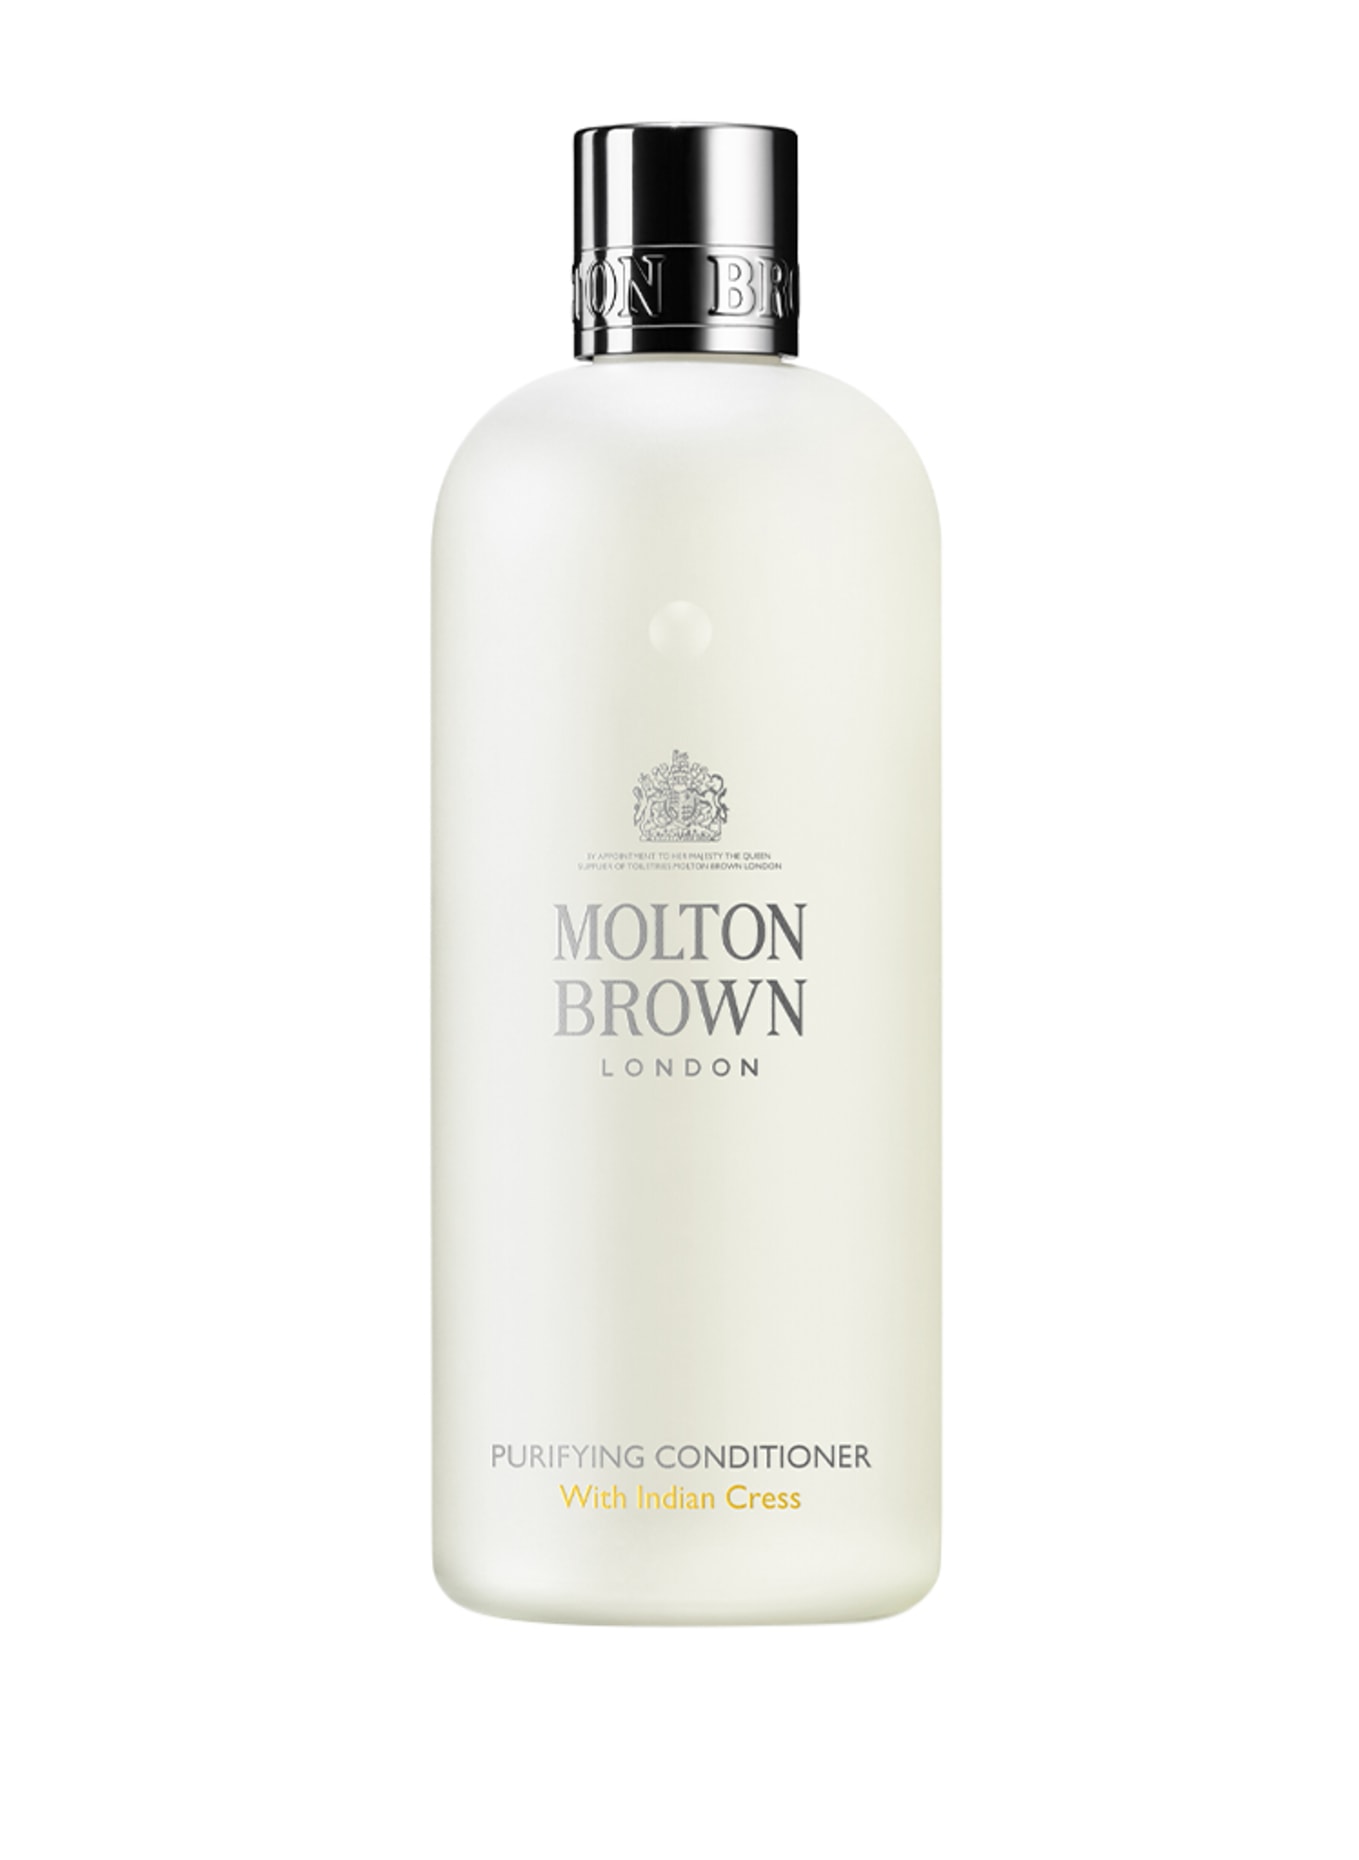 MOLTON BROWN PURIFYING CONDITIONER WITH INDIAN CRESS (Obrazek 1)